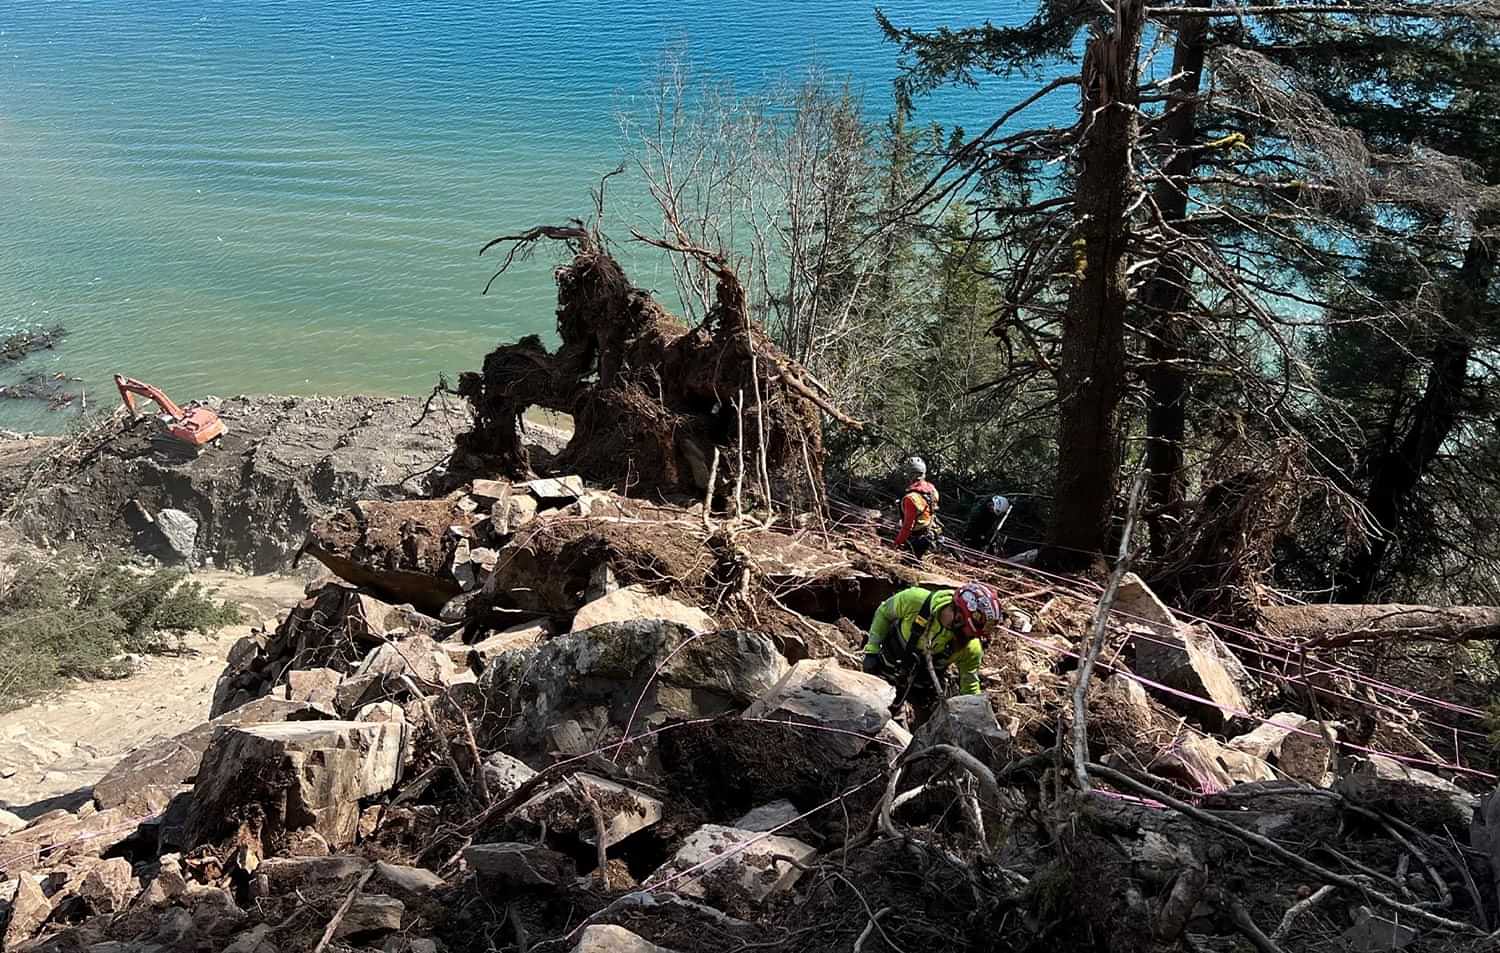 a clean up crew works on a landslide area over a body of water